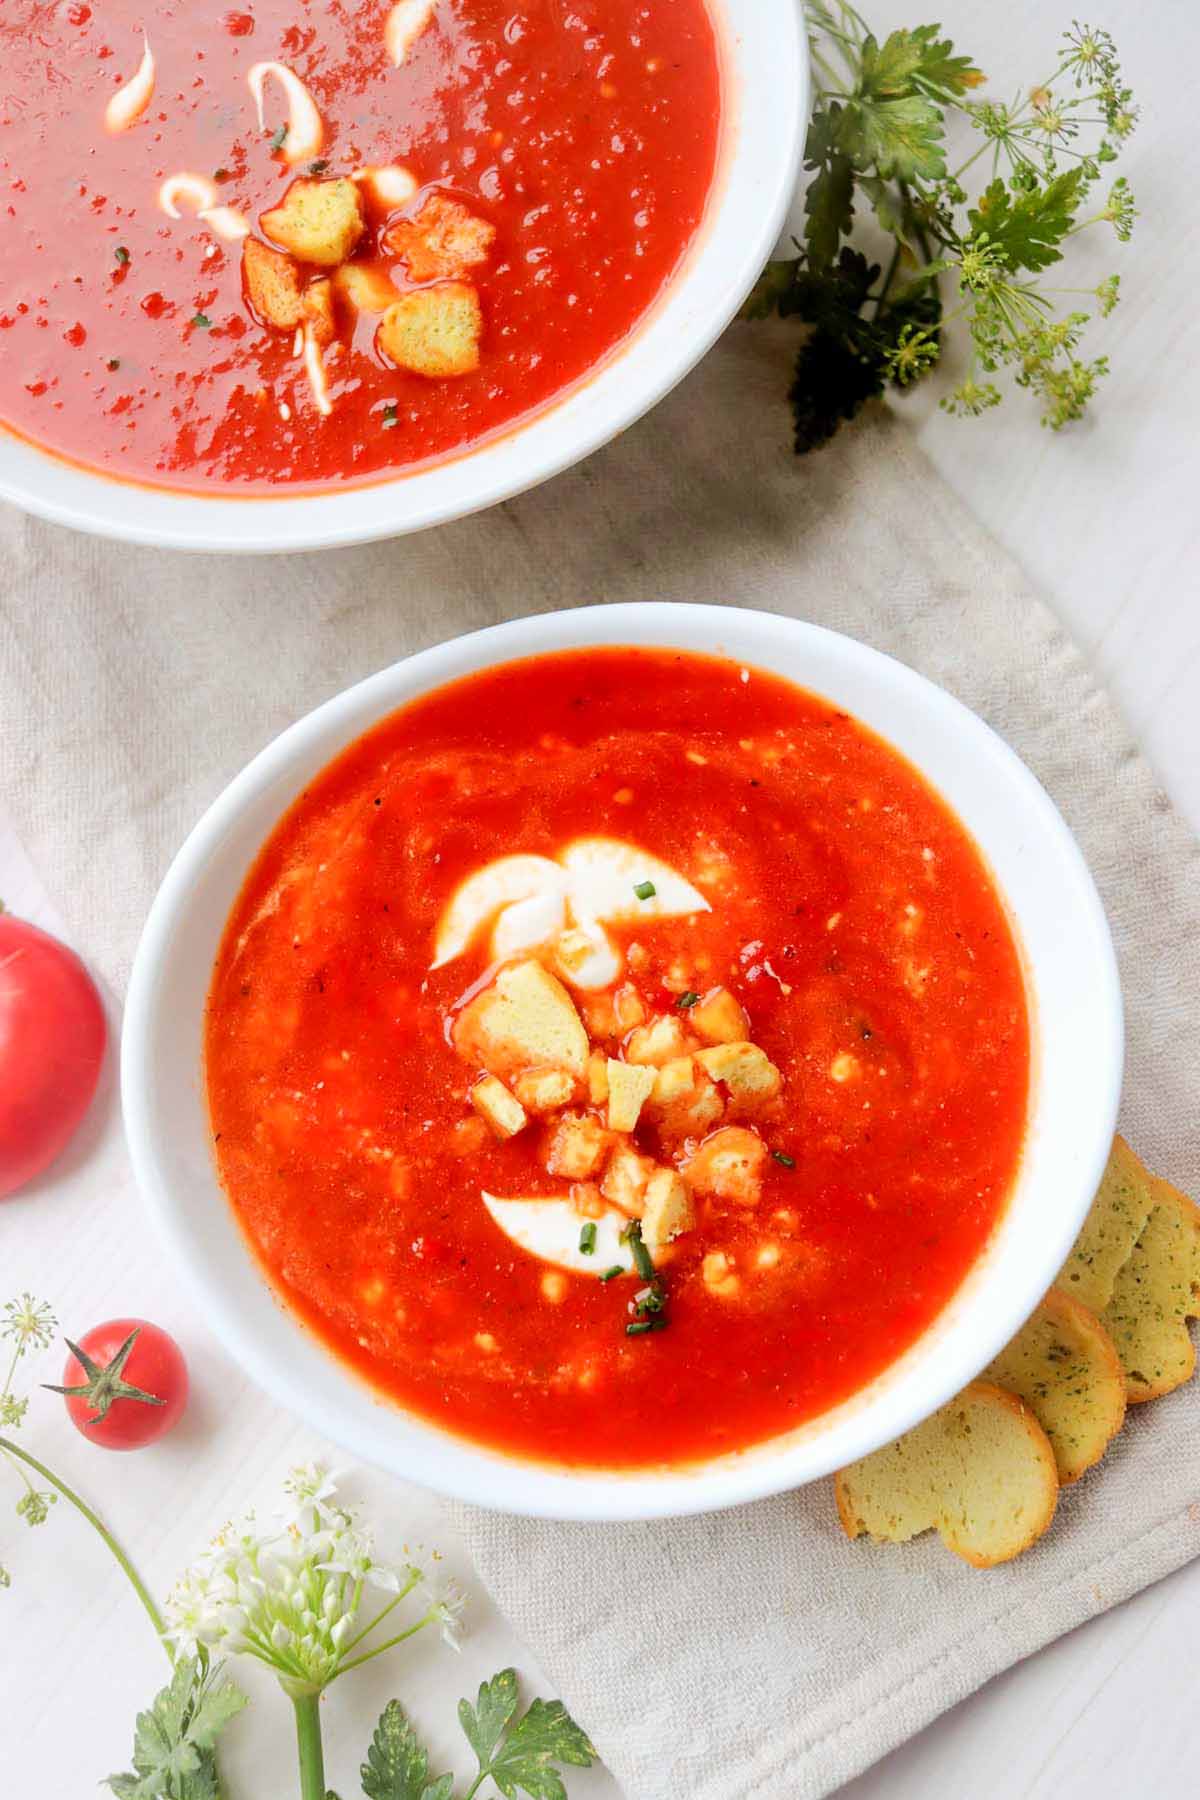 Tomato soup topped with croutons.